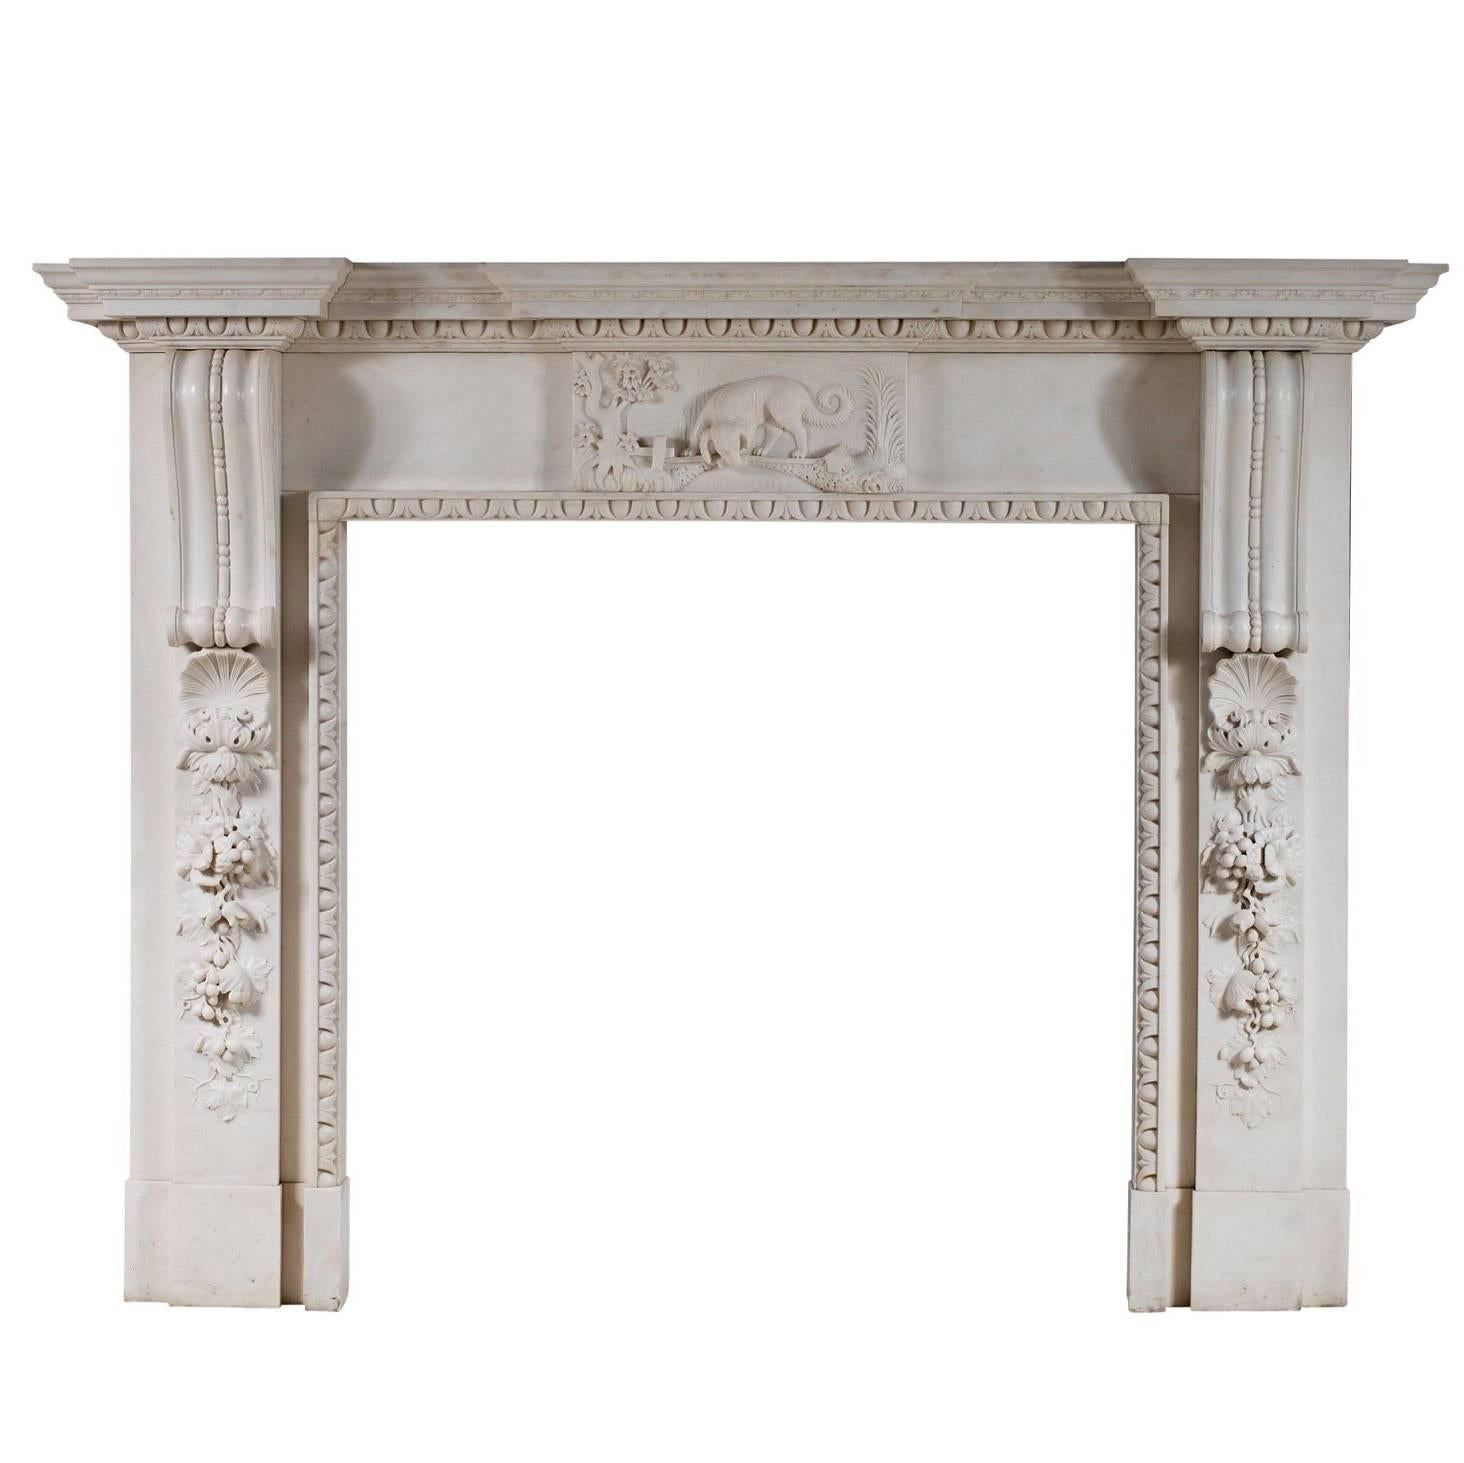 Mid-Georgian Style Fireplace in White Marble